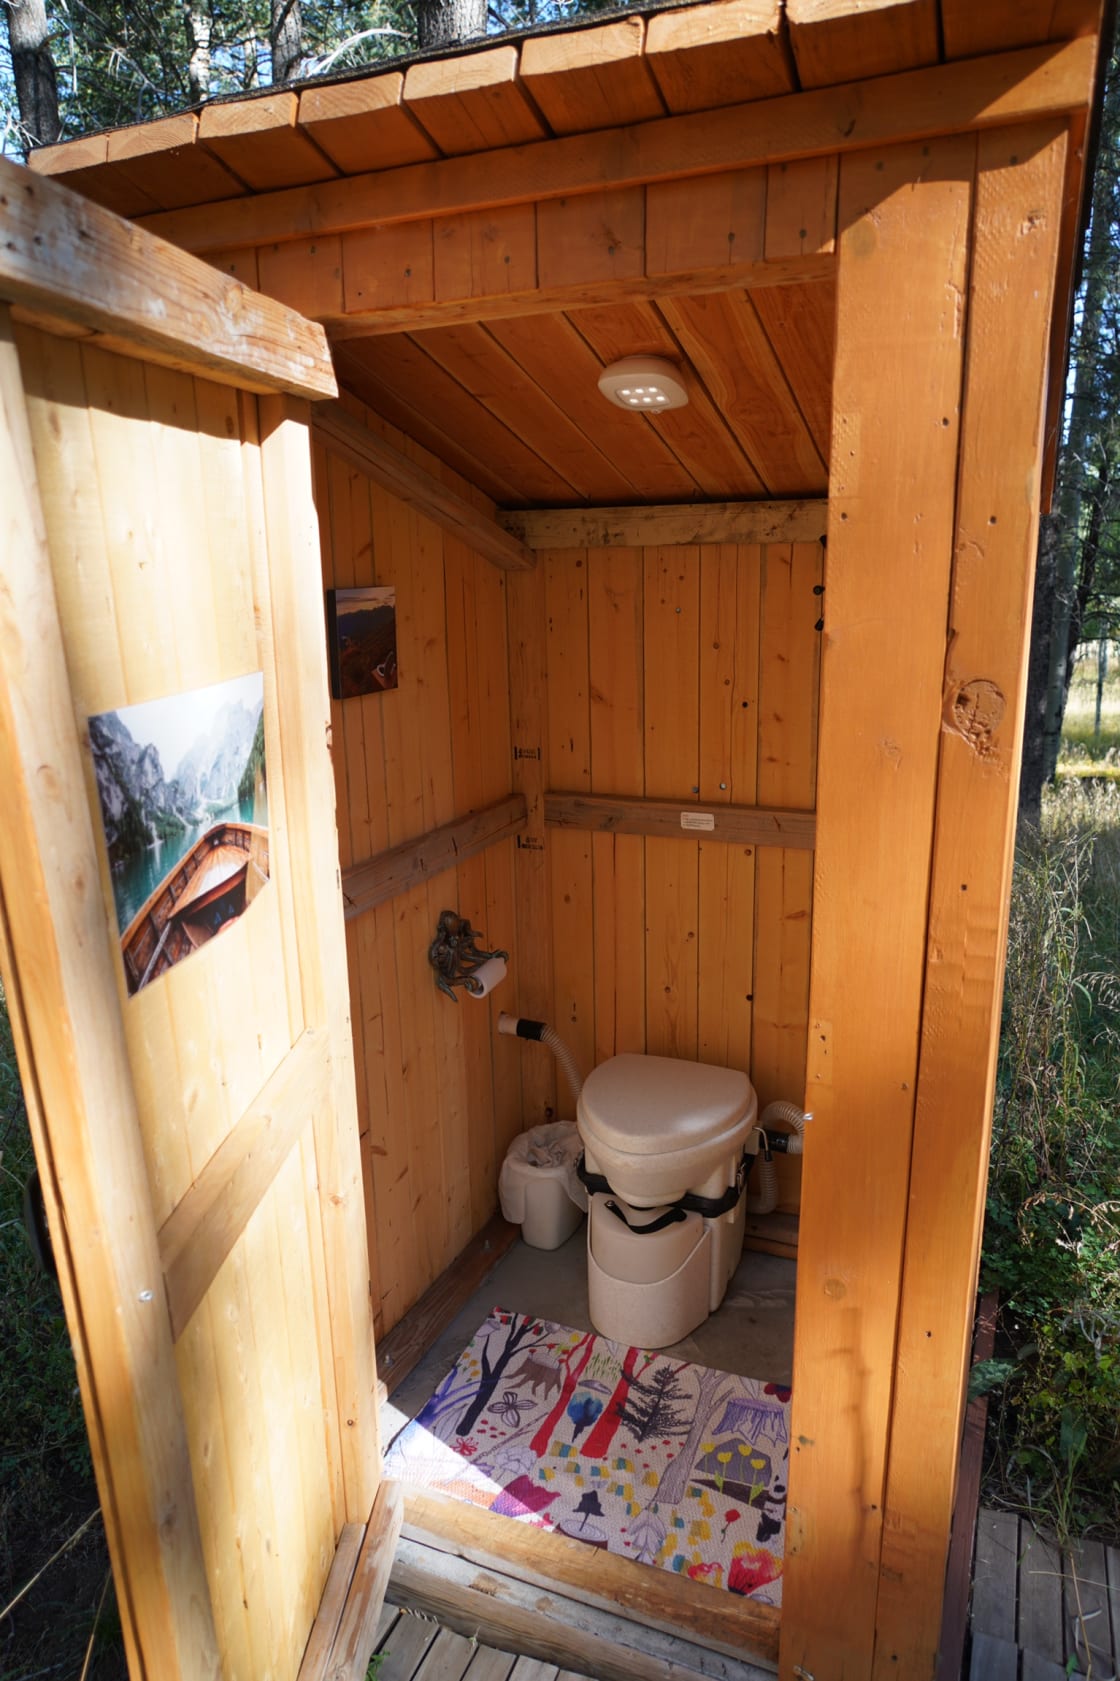 Very clean and odorless composting toilet